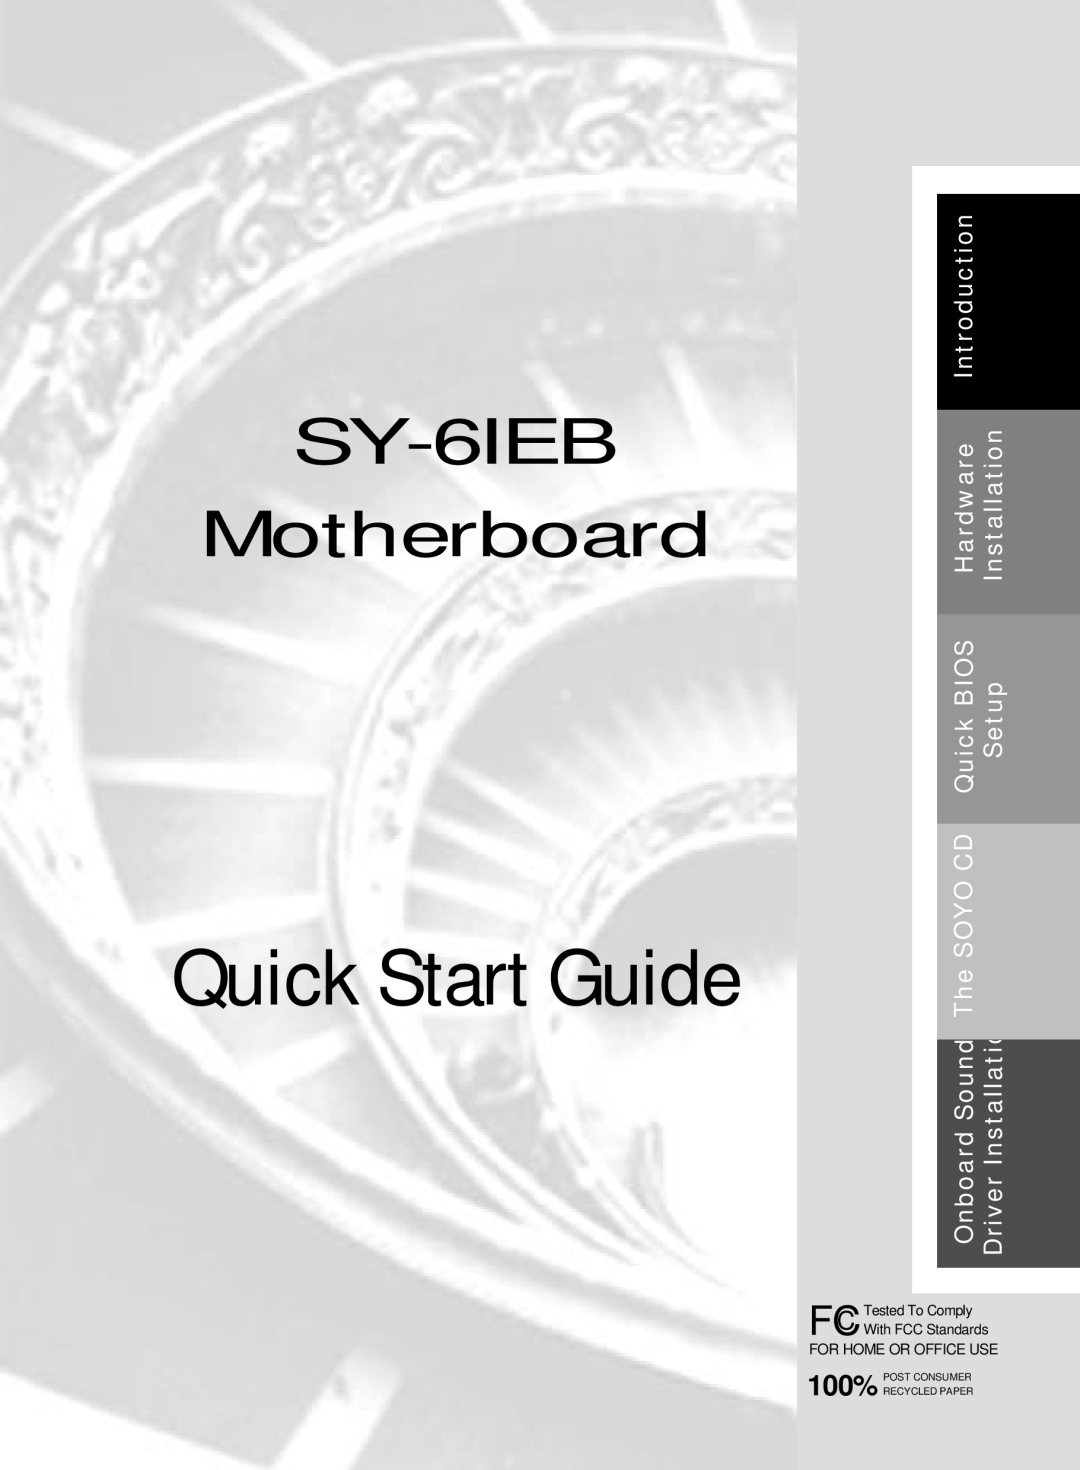 SOYO SY-6IEB quick start Introduction, Hardware, Installation, Quick BIOS, Setup, The SOYO CD, Quick Start Guide 